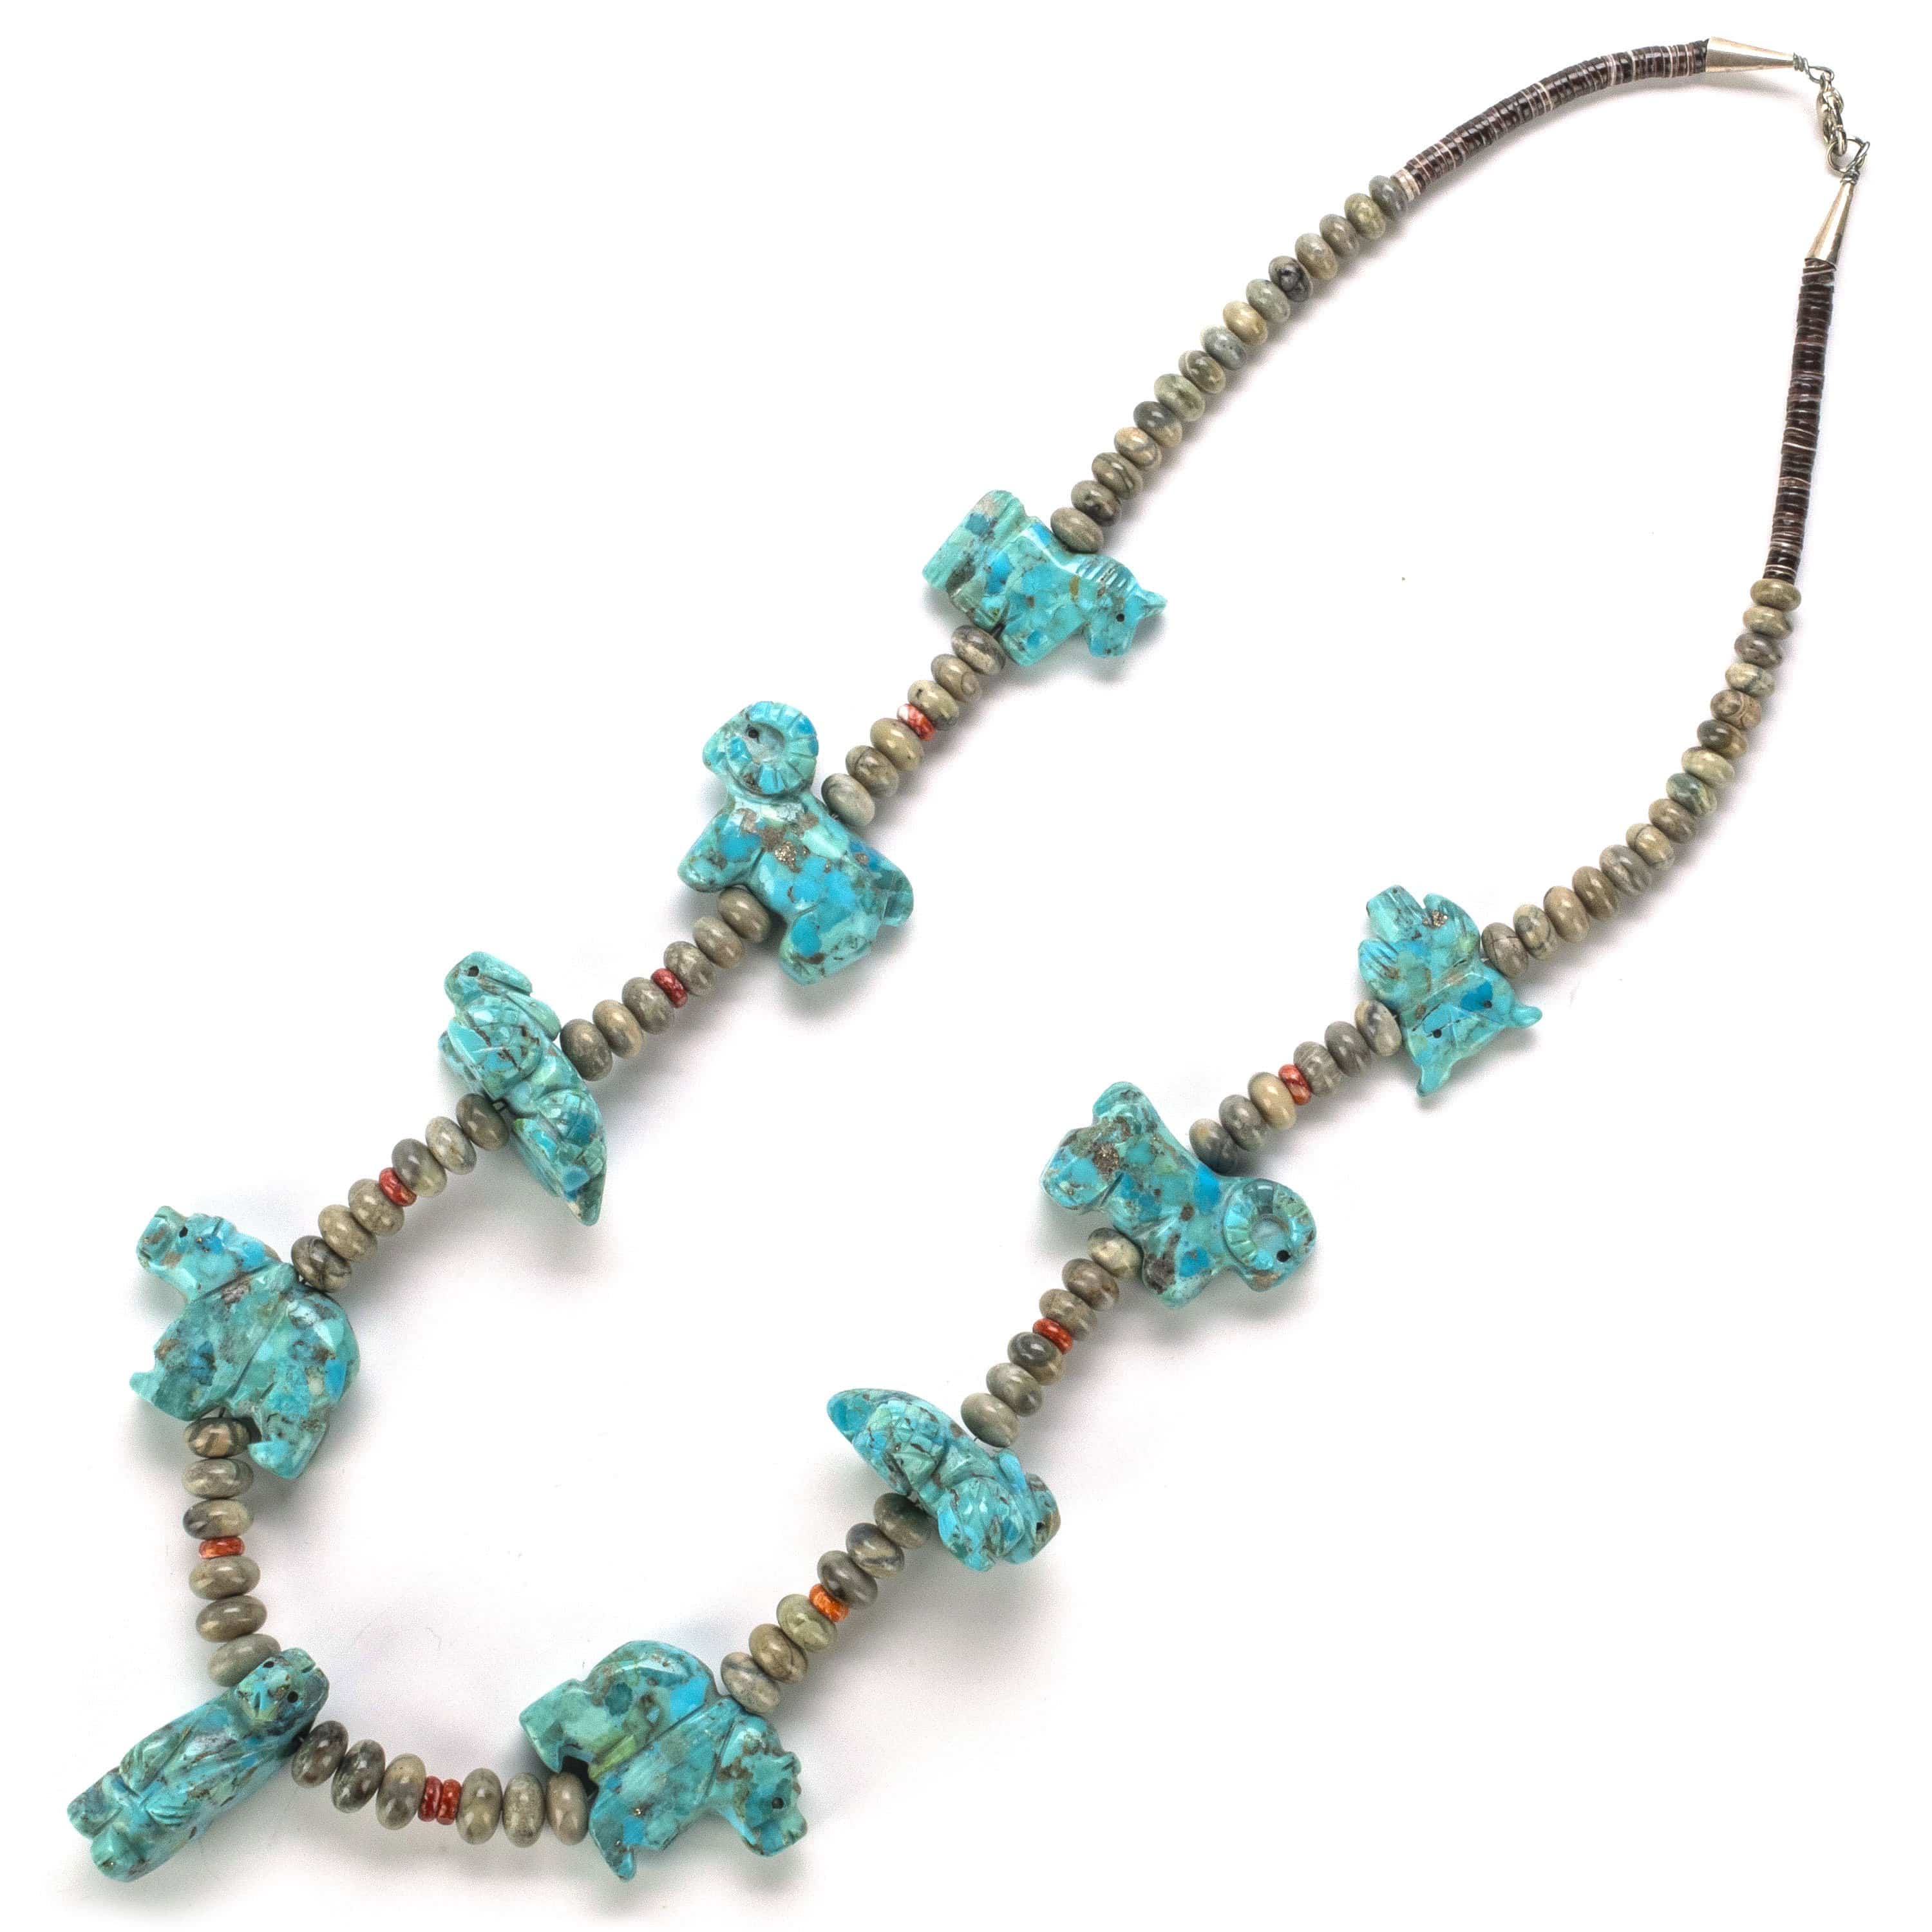 Kalifano Native American Jewelry Stacey Turpin Kingman Turquoise Fetish Carvings USA Native American Made 925 Sterling Silver Necklace NAN2100.002